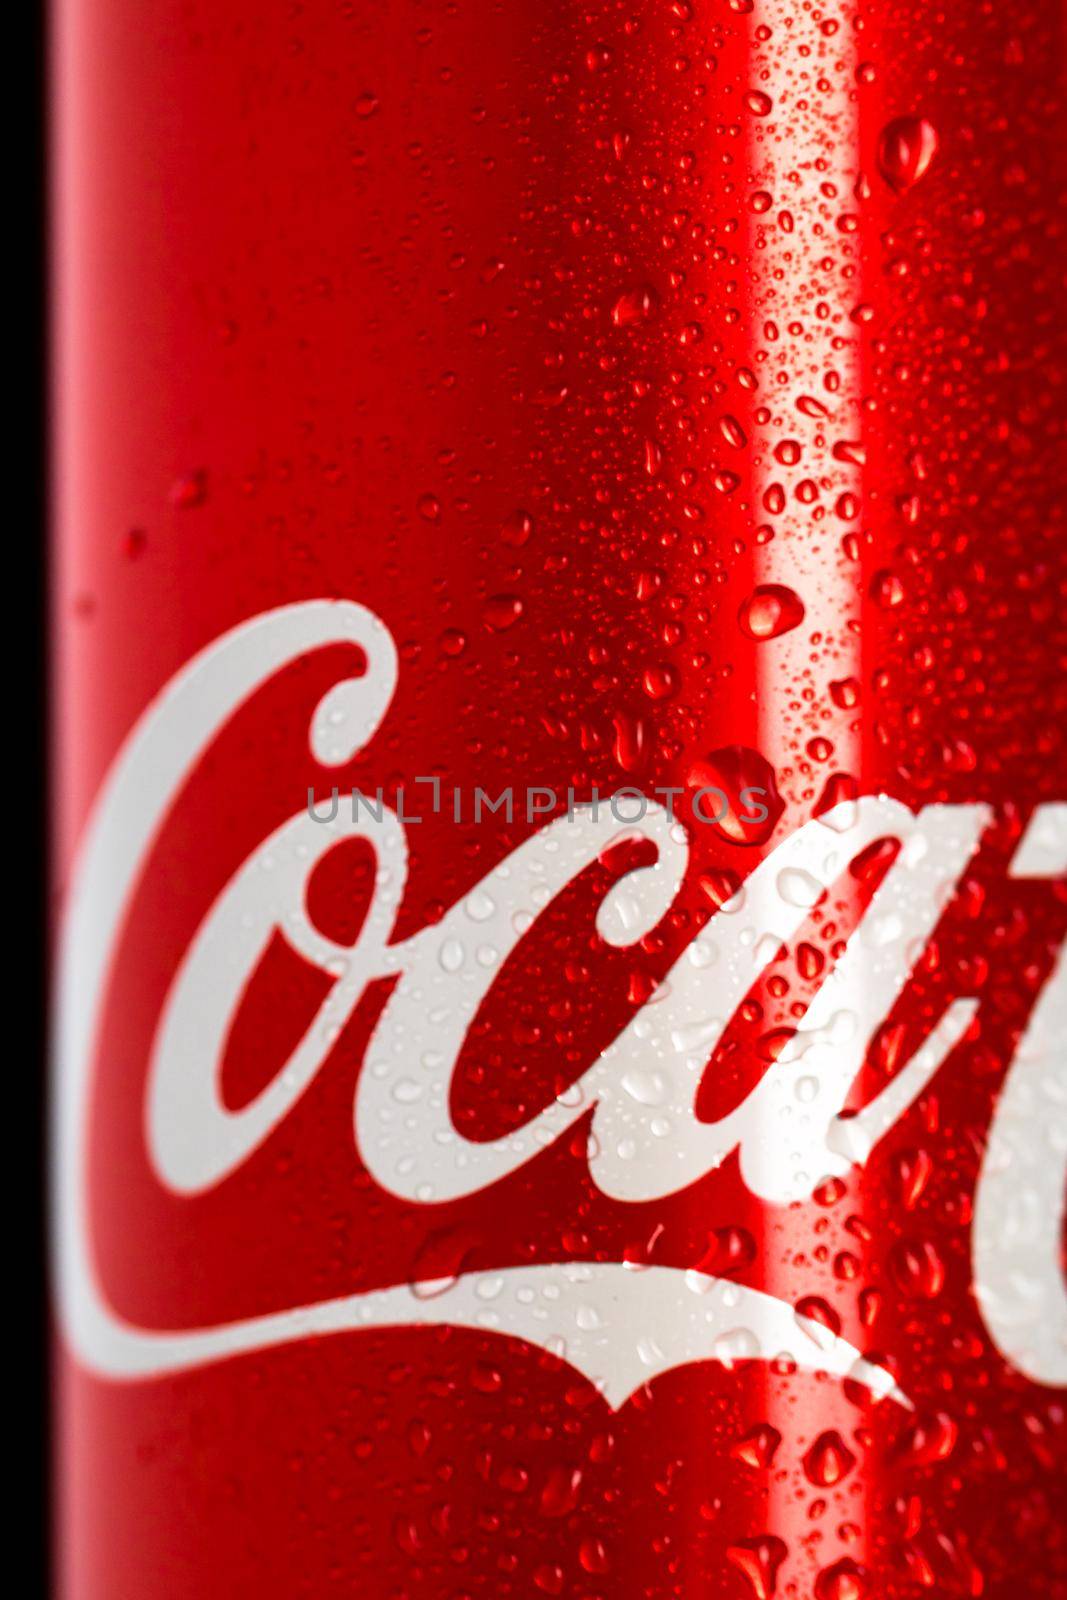 Detail of classic Coca-Cola can on black background. Studio shot in Bucharest, Romania, 2021